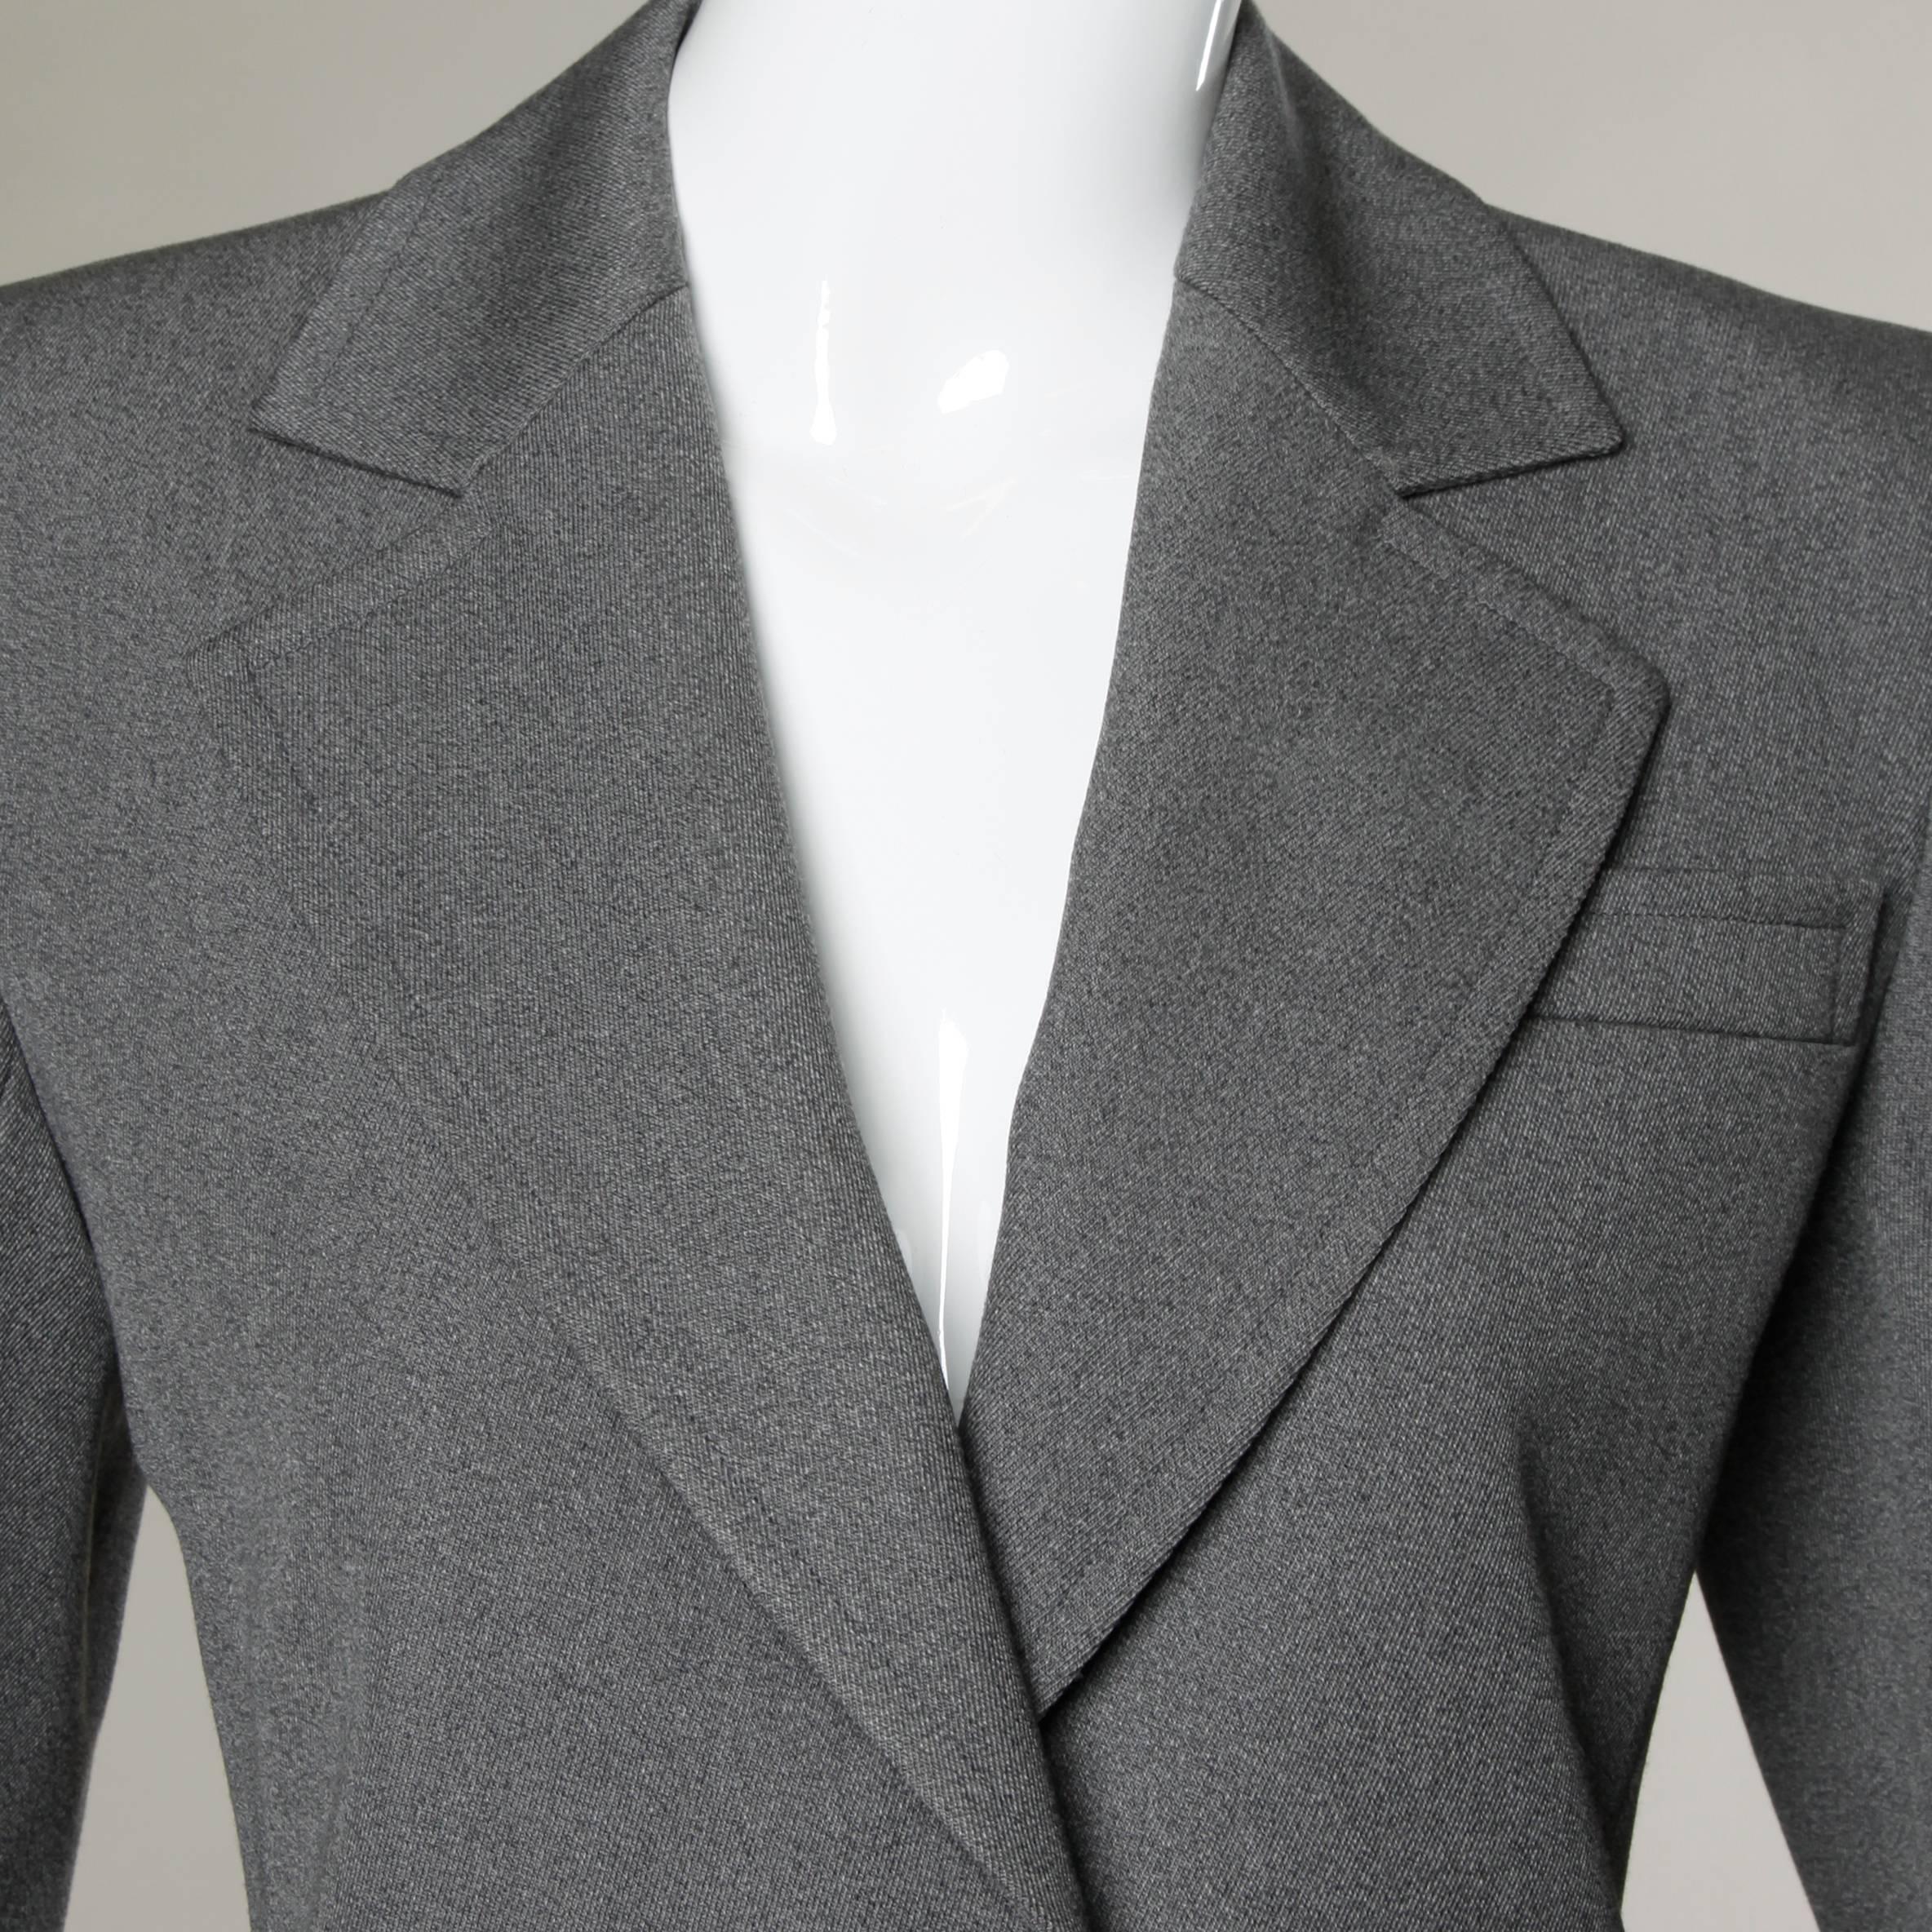 Beautifully tailored gray wool blazer jacket by Saint Laurent . 
Details:

Fully Lined
Front Pockets
Shoulder Pads Are Sewn Into Lining
Front Button Closure
Marked Size: 38
Estimated Size: M
Color: Gray
Fabric: Wool
Label: Saint Laurent/ Rive